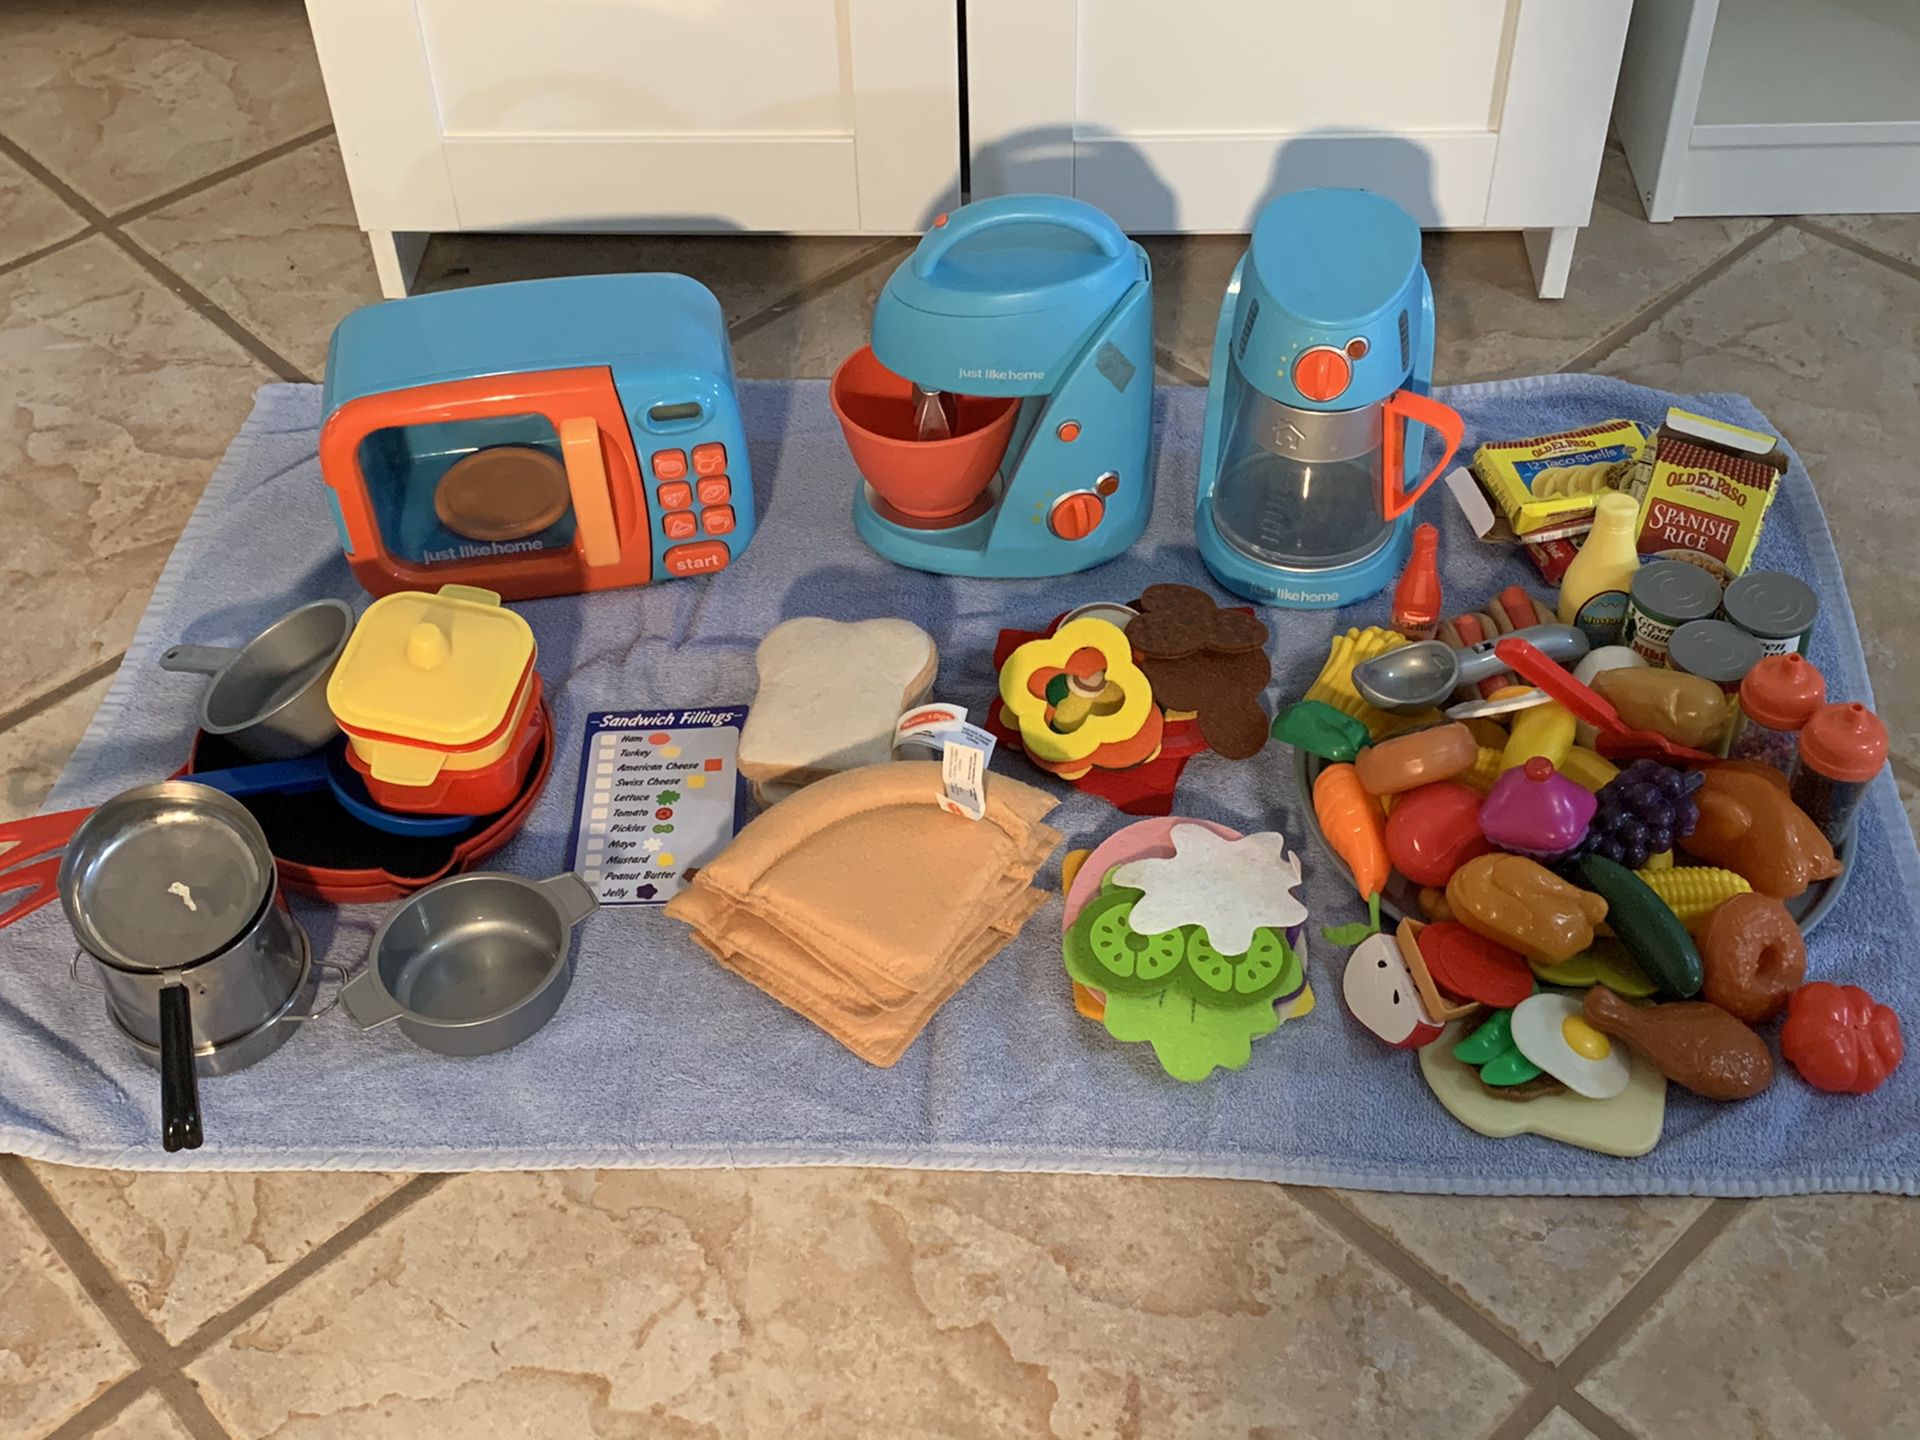 Kid’s kitchen sets (Just Like Home-Toys R Us, Melissa and Doug)